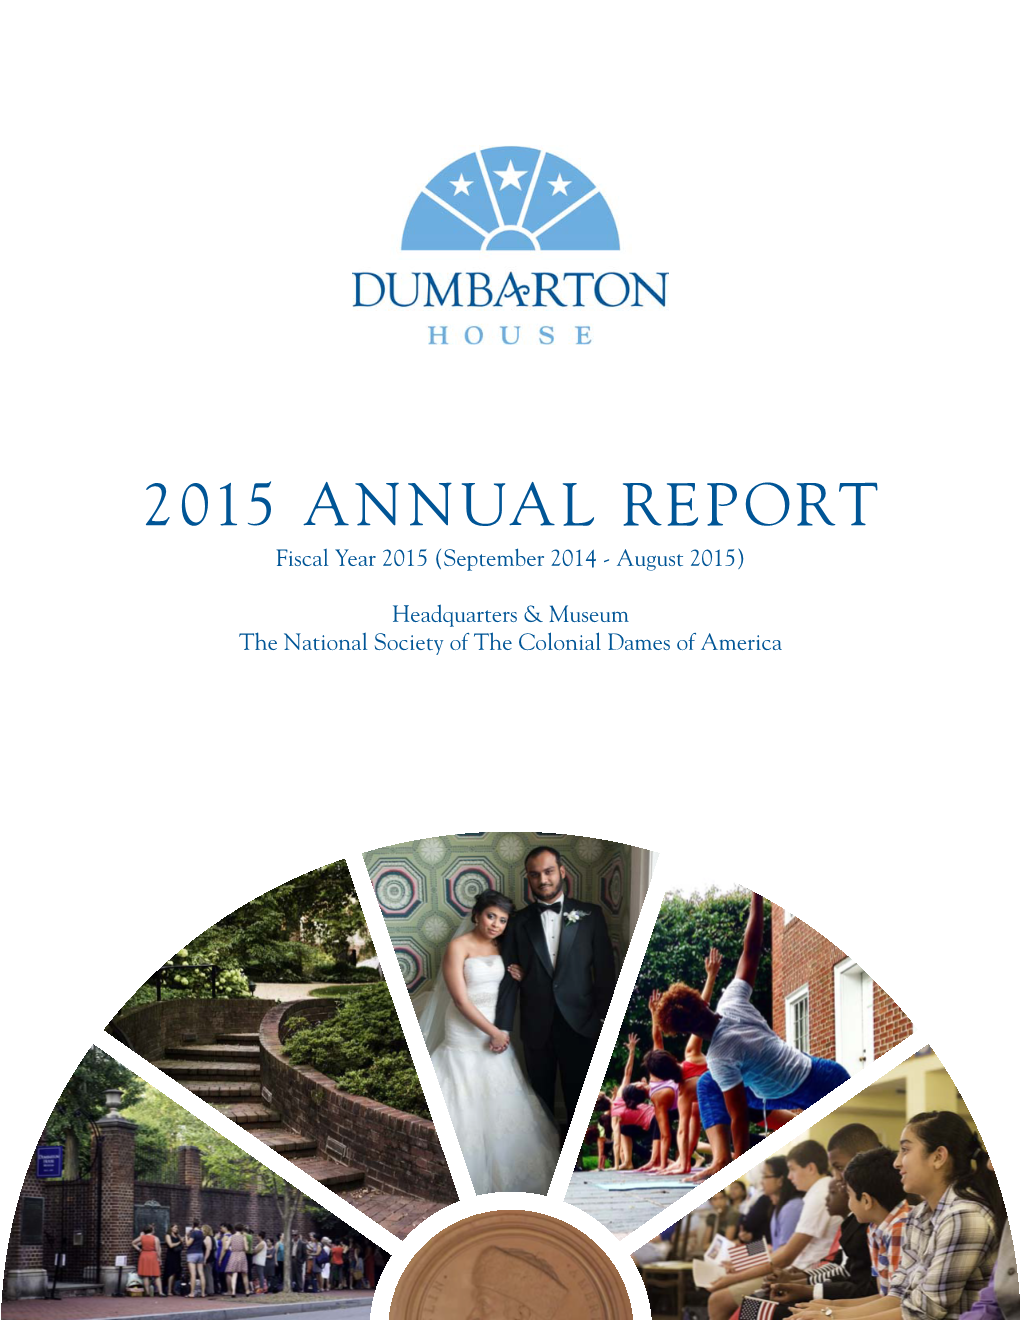 2015 ANNUAL REPORT Fiscal Year 2015 (September 2014 - August 2015)